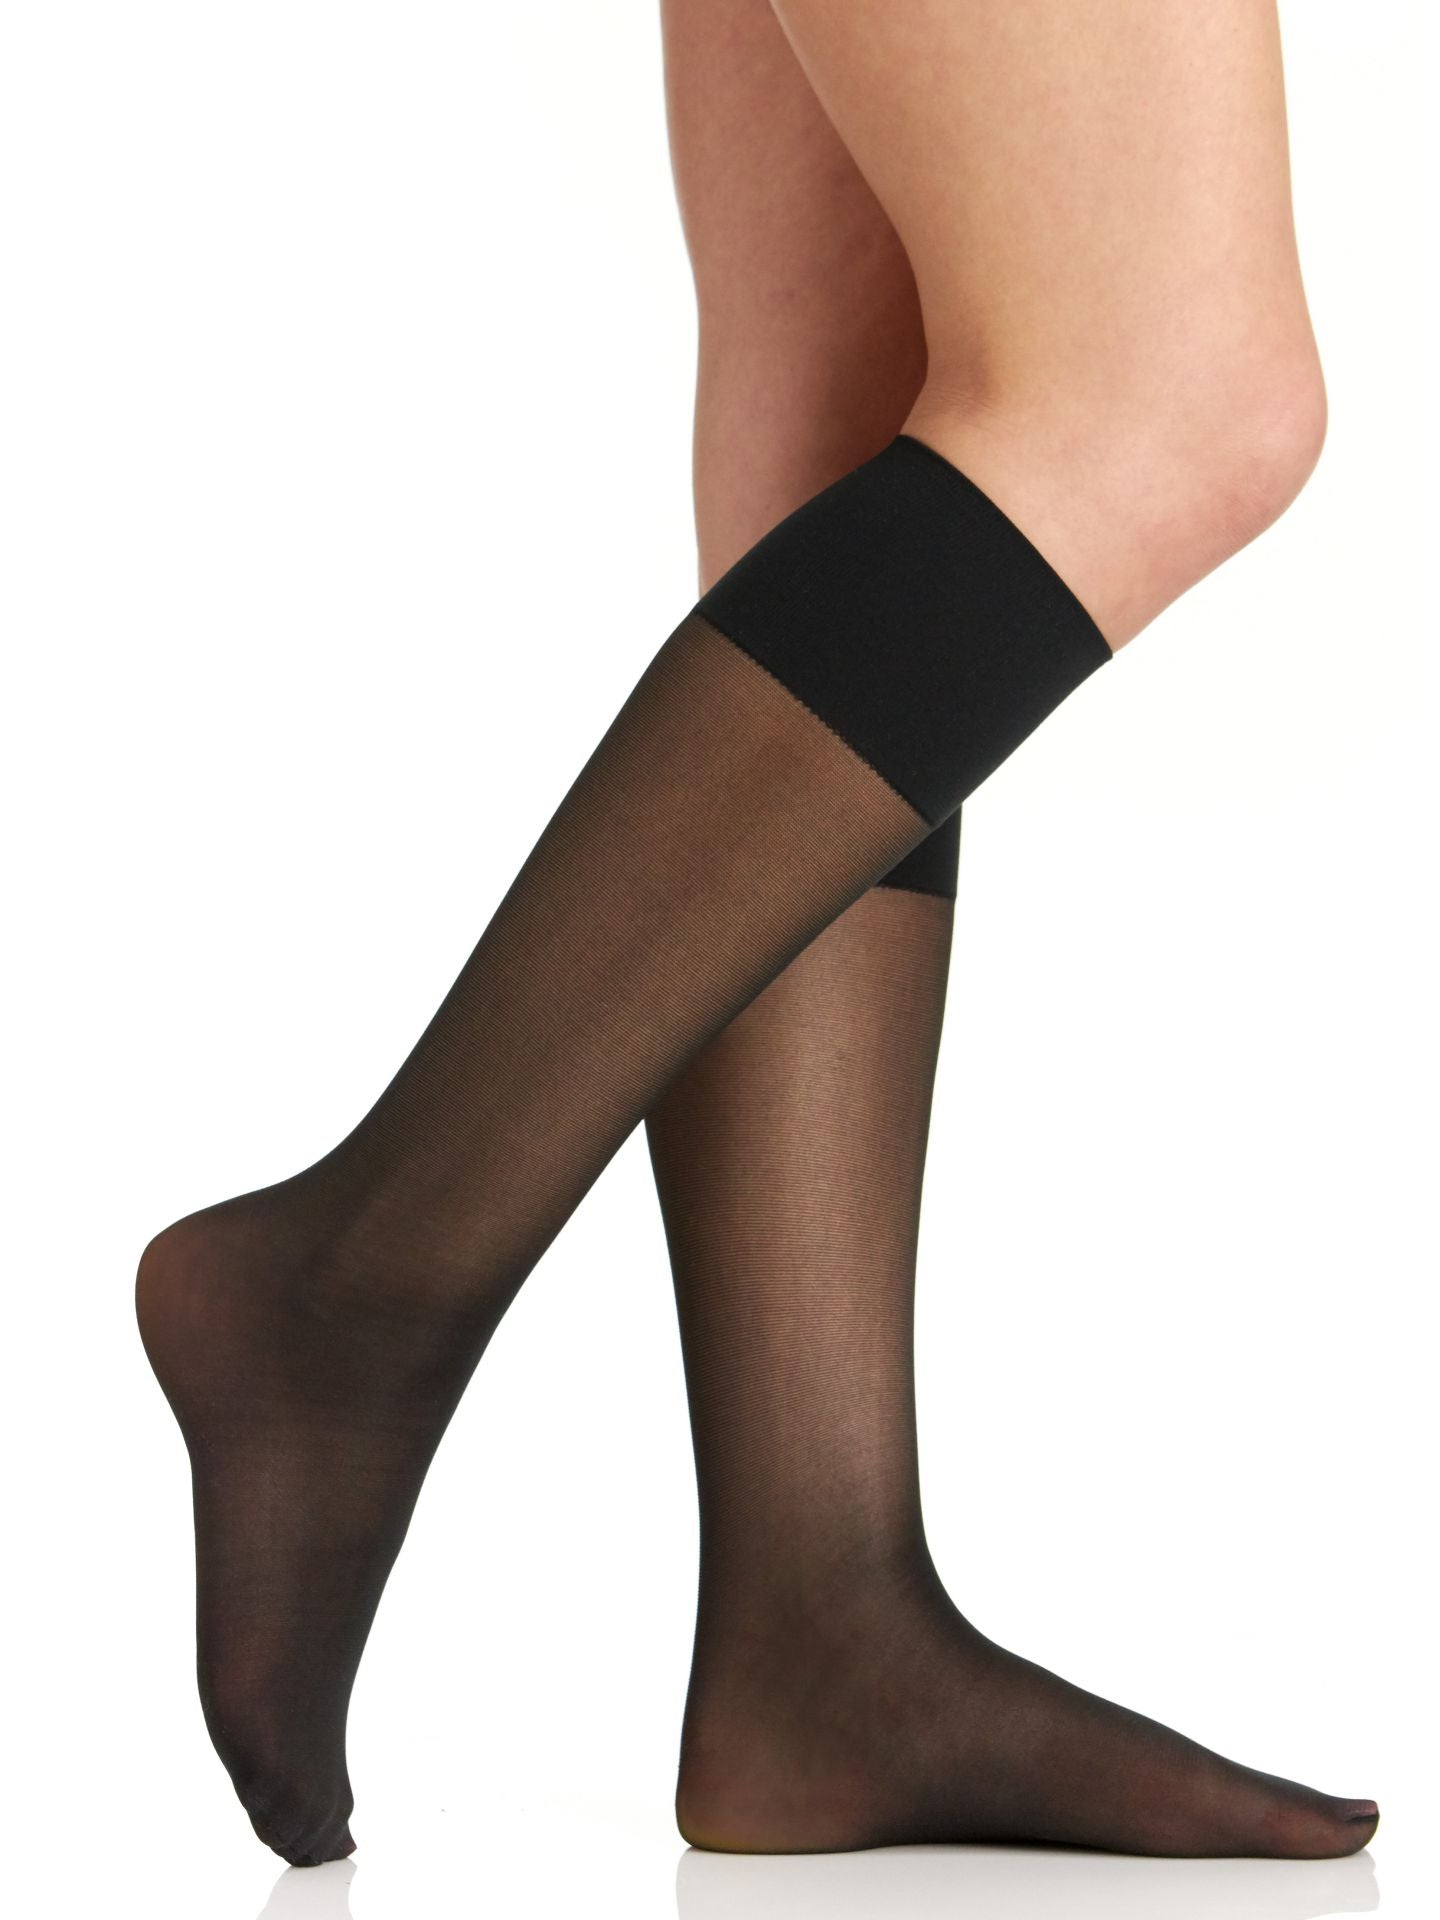 Comfy Cuff Plus Size Sheer Graduated Compression Trouser Sock with Sandalfoot Toe - 5202